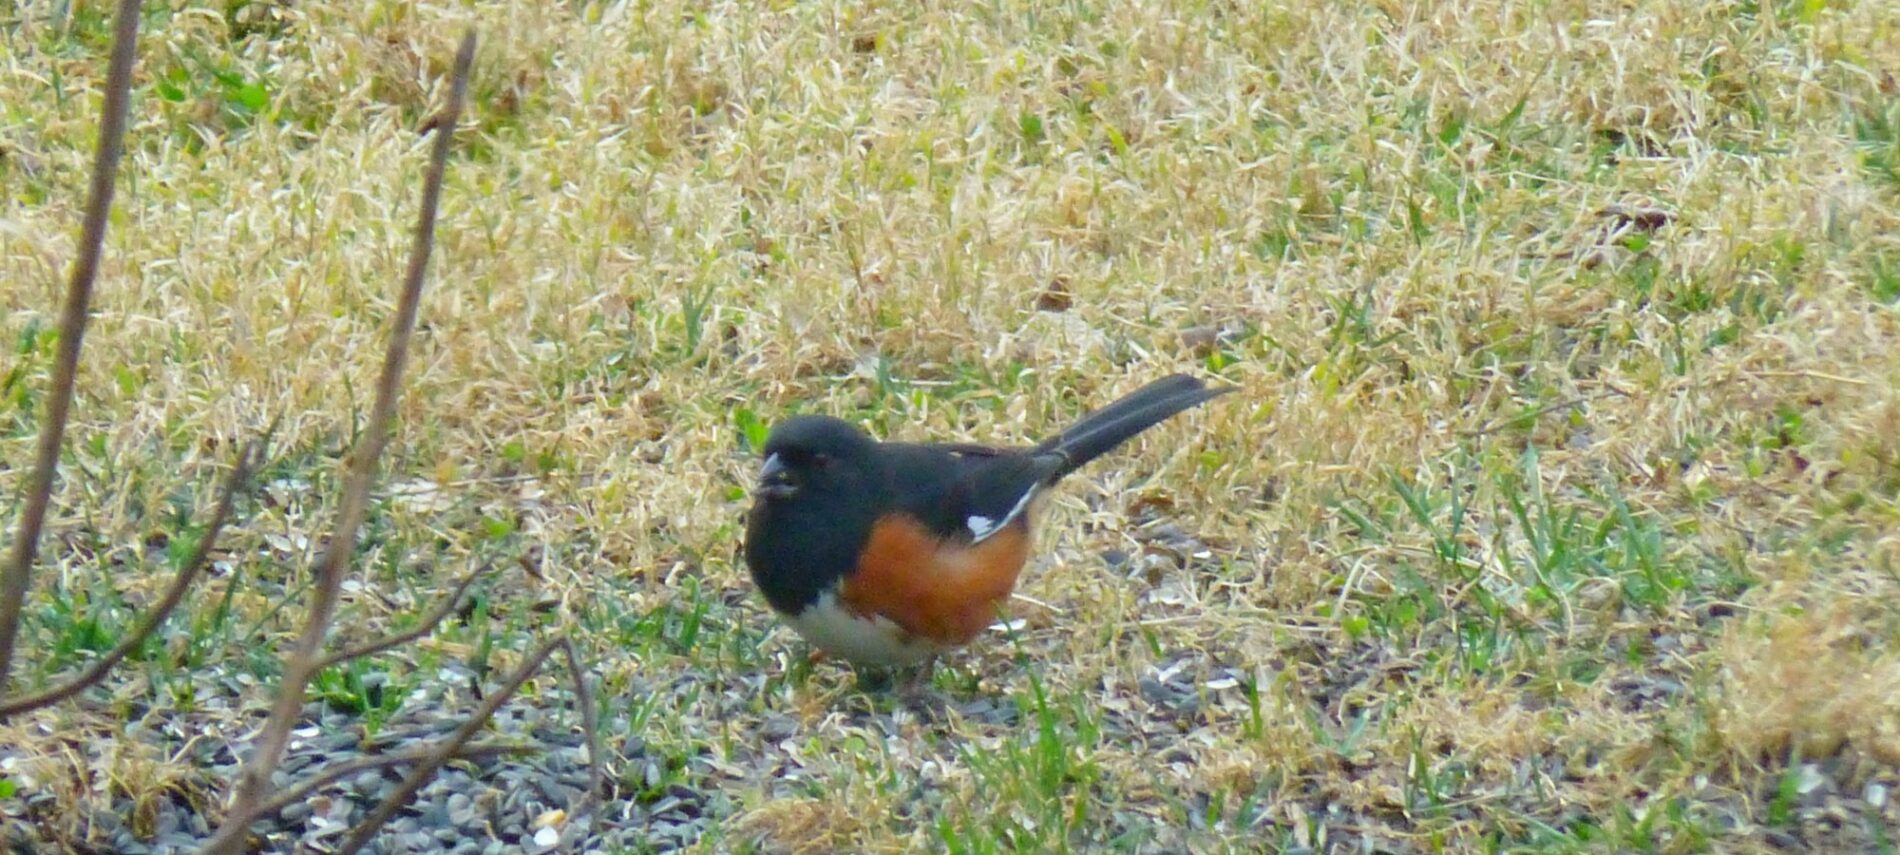 Eastern Towhee Male - stocky bird with black upper parts, orange sides and white belly